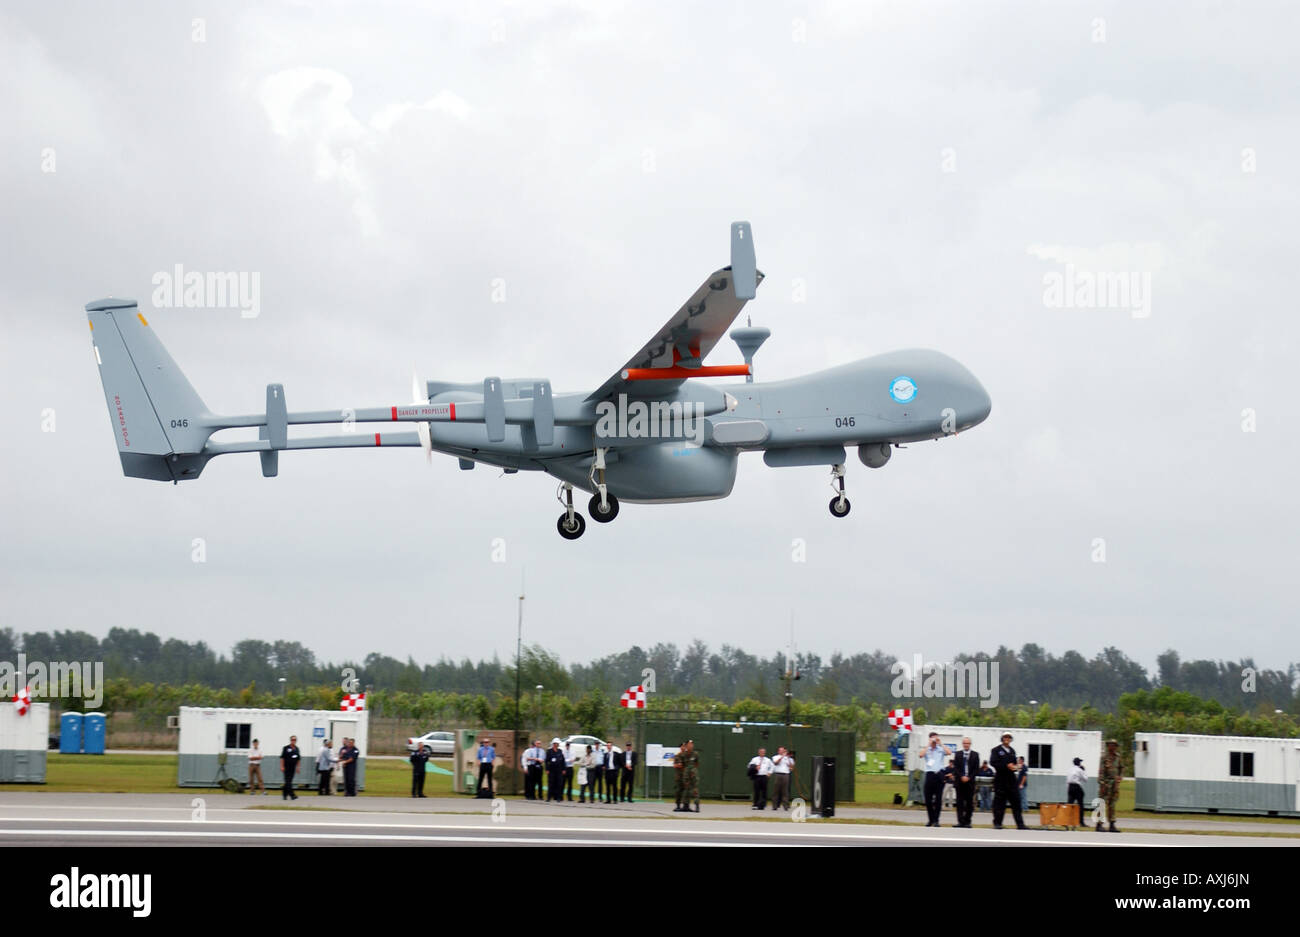 The Heron unmanned aerial vehicle (UAV) takes off from an army base in Singapore Stock Photo